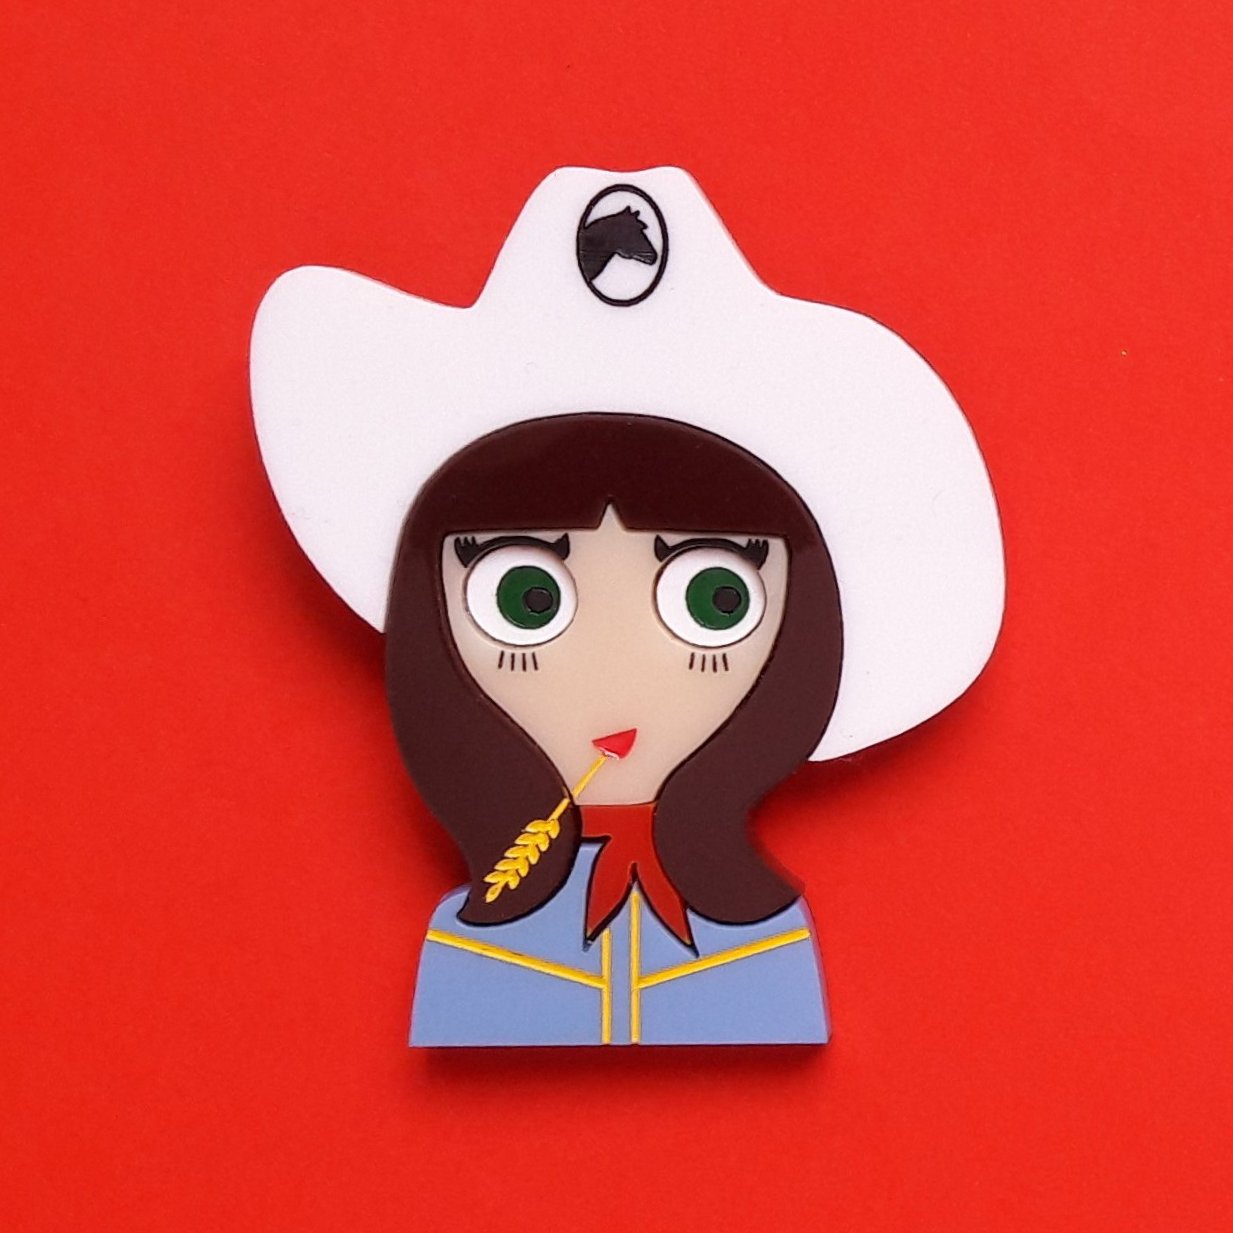 JO Cowgirl Acrylic Brooch, February Limited Numbered Edition - Isa Duval